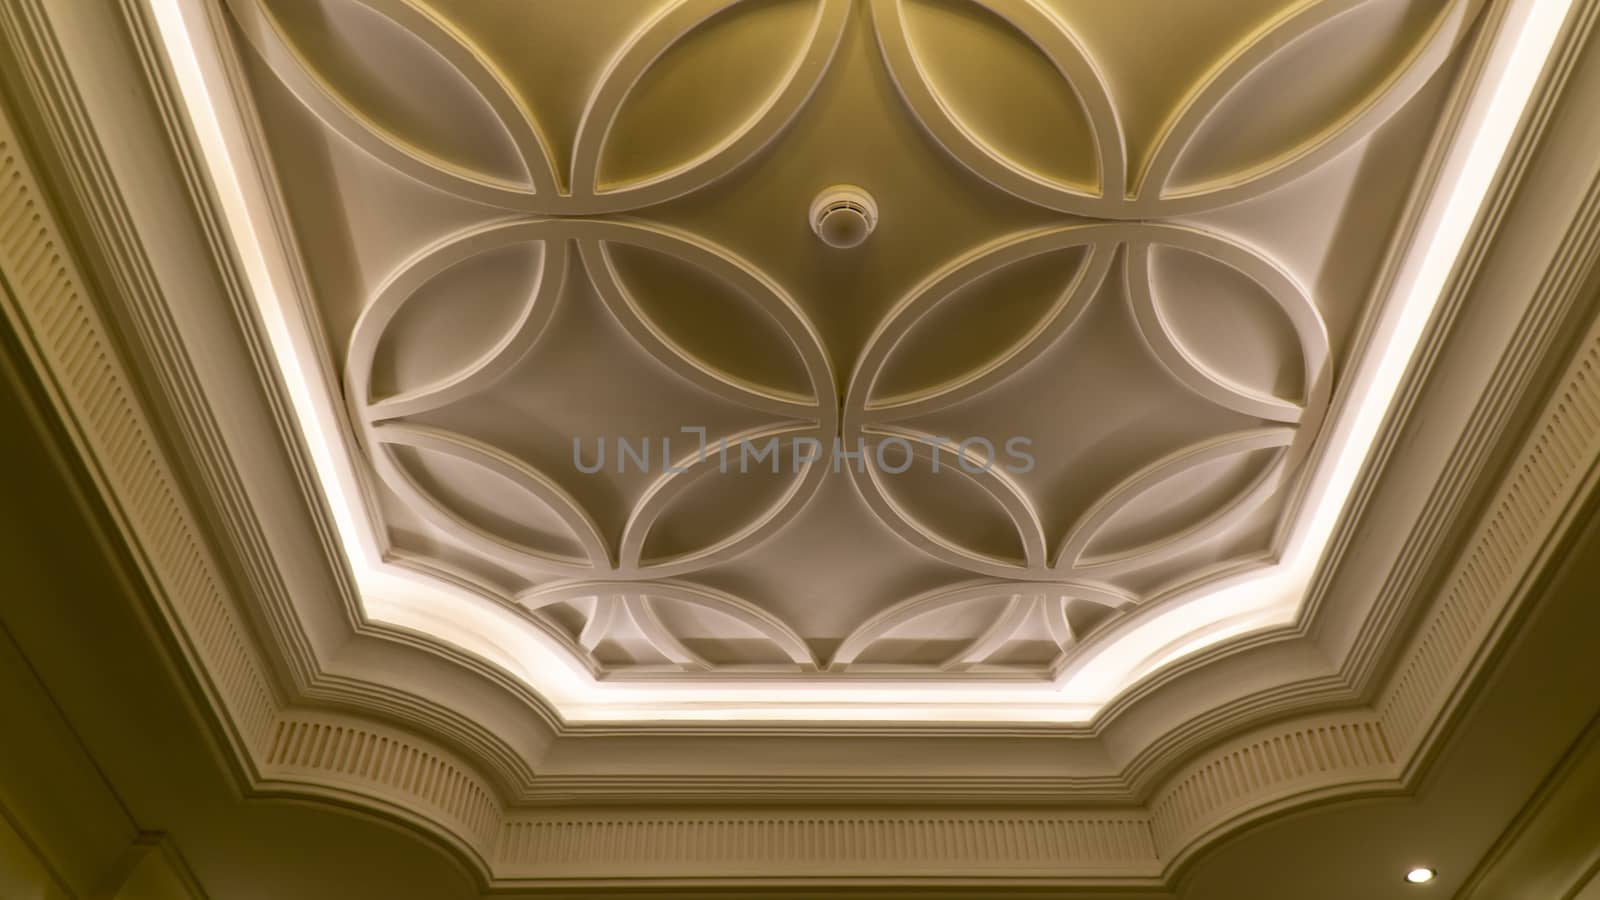 Ceiling design with lighting decorations